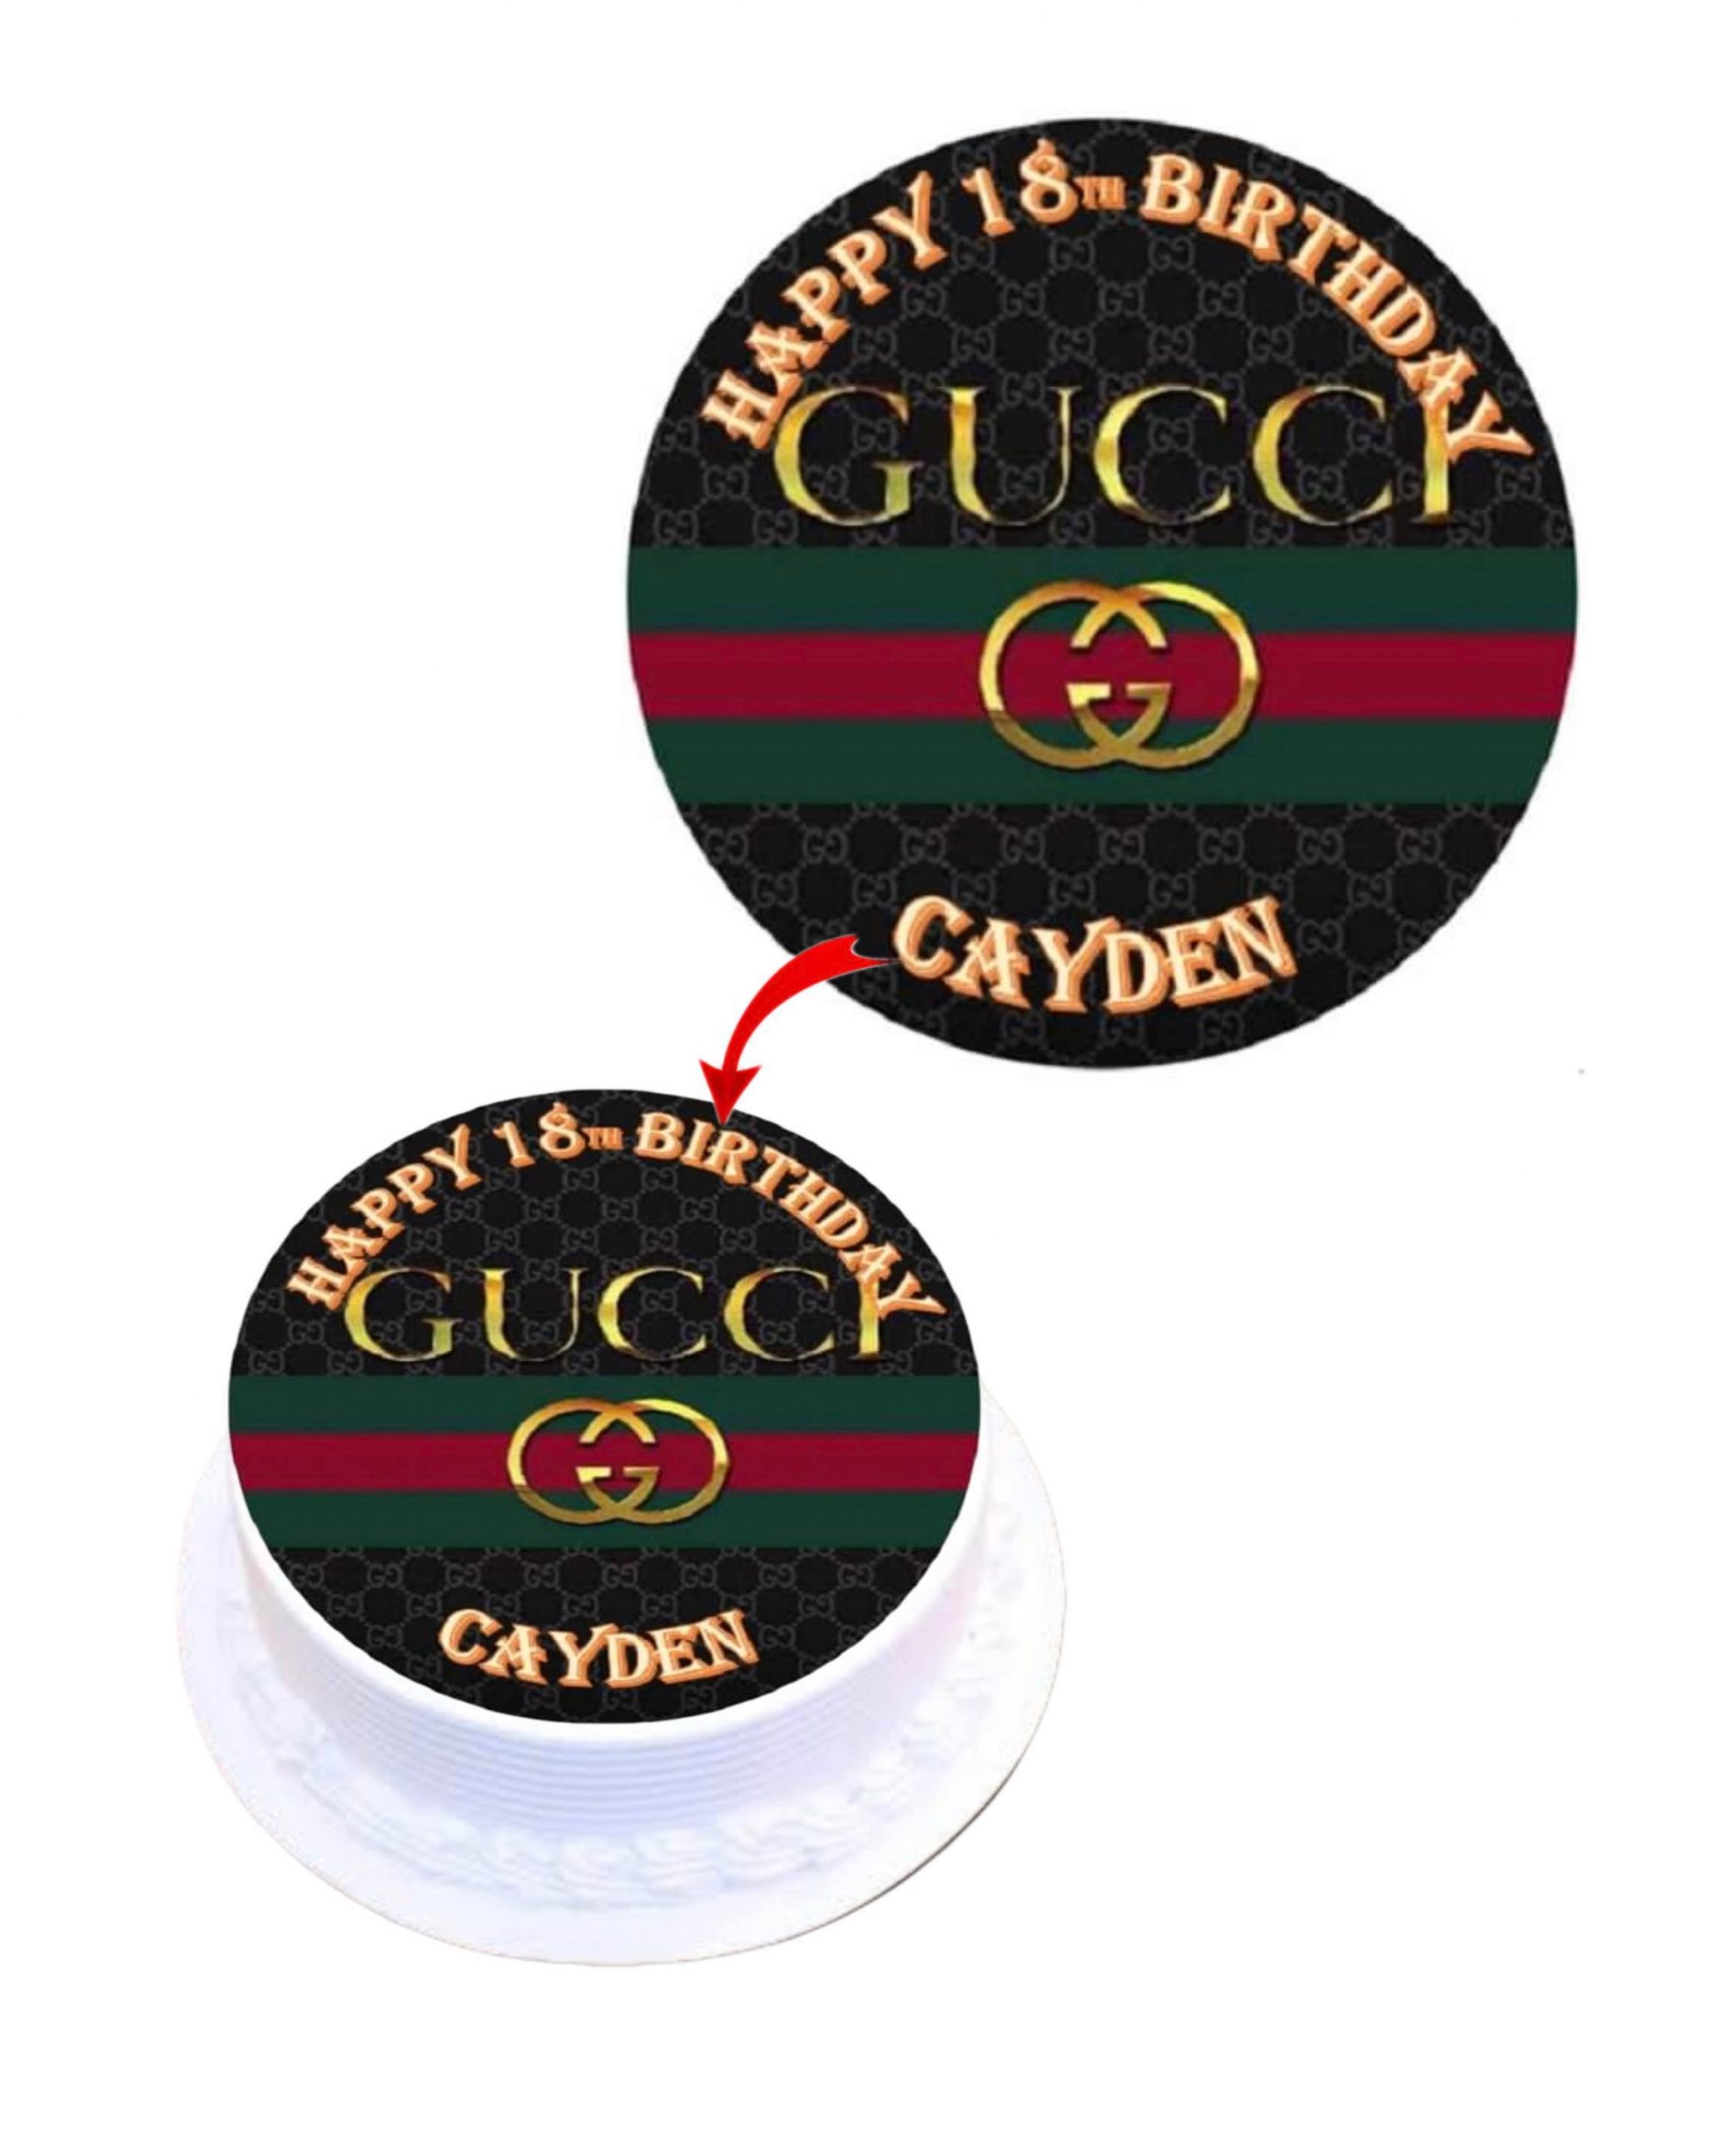 Gucci Personalised Edible Cake Topper Decoration Images - Happy Party